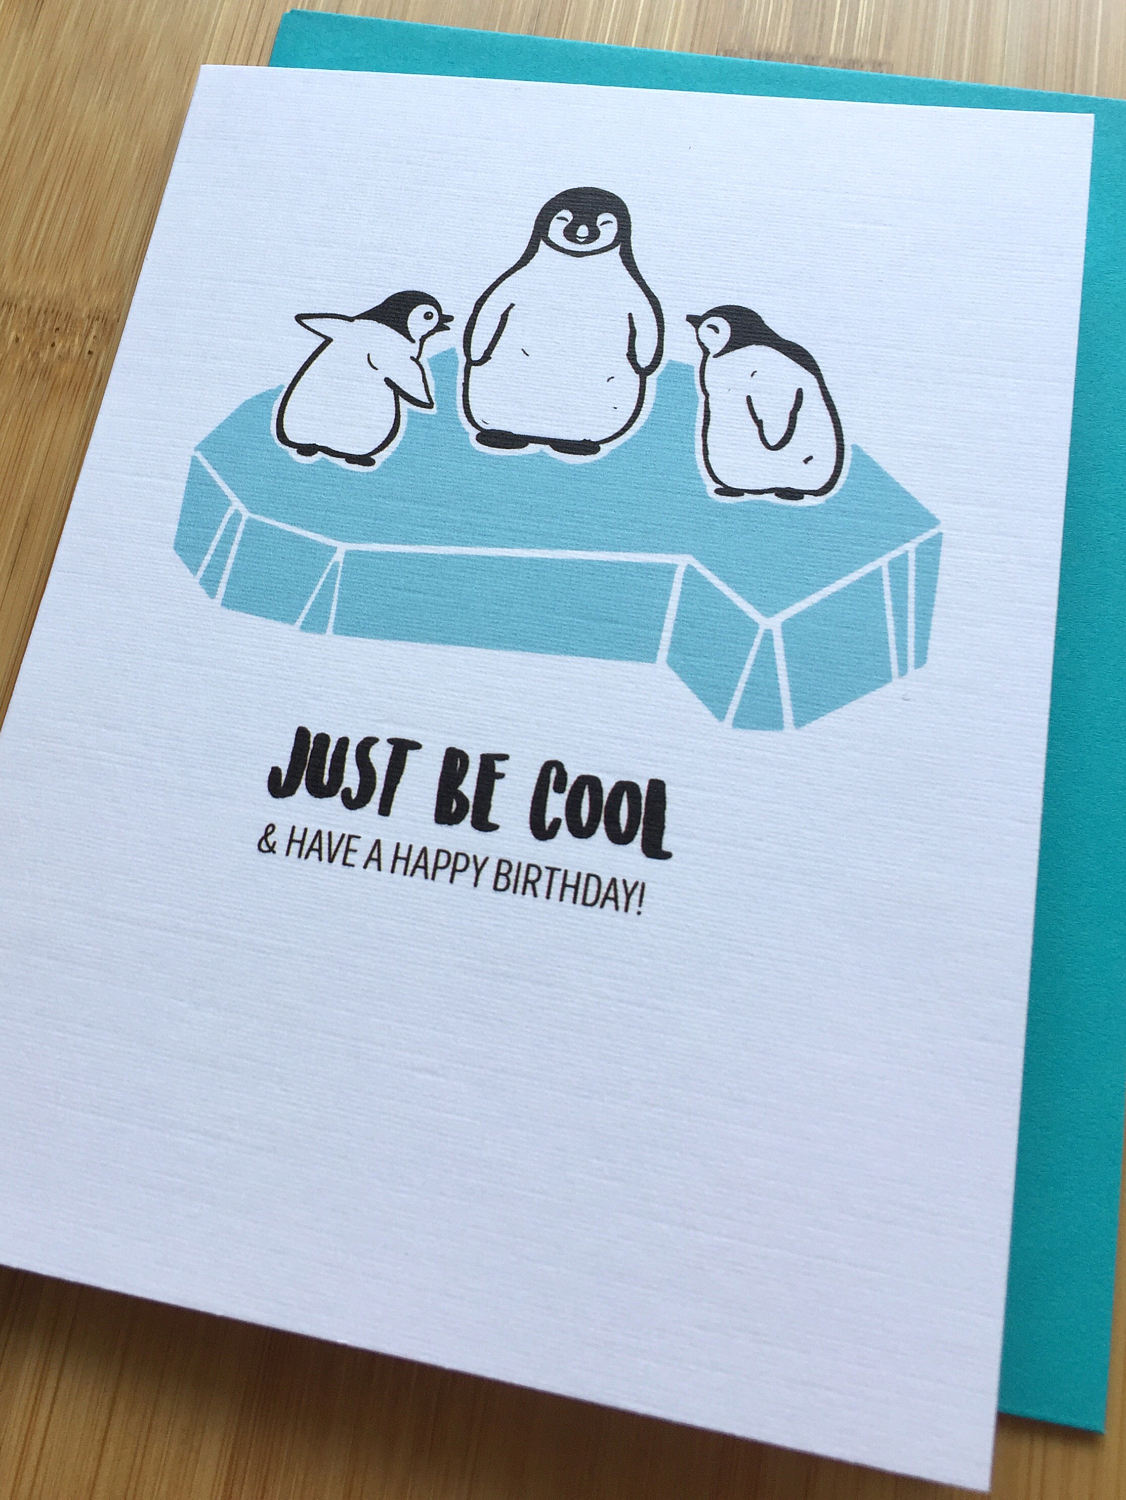 Just Be Cool Penguin Card - A2 Punny Cute Penguin Birthday Card, Penguin gift